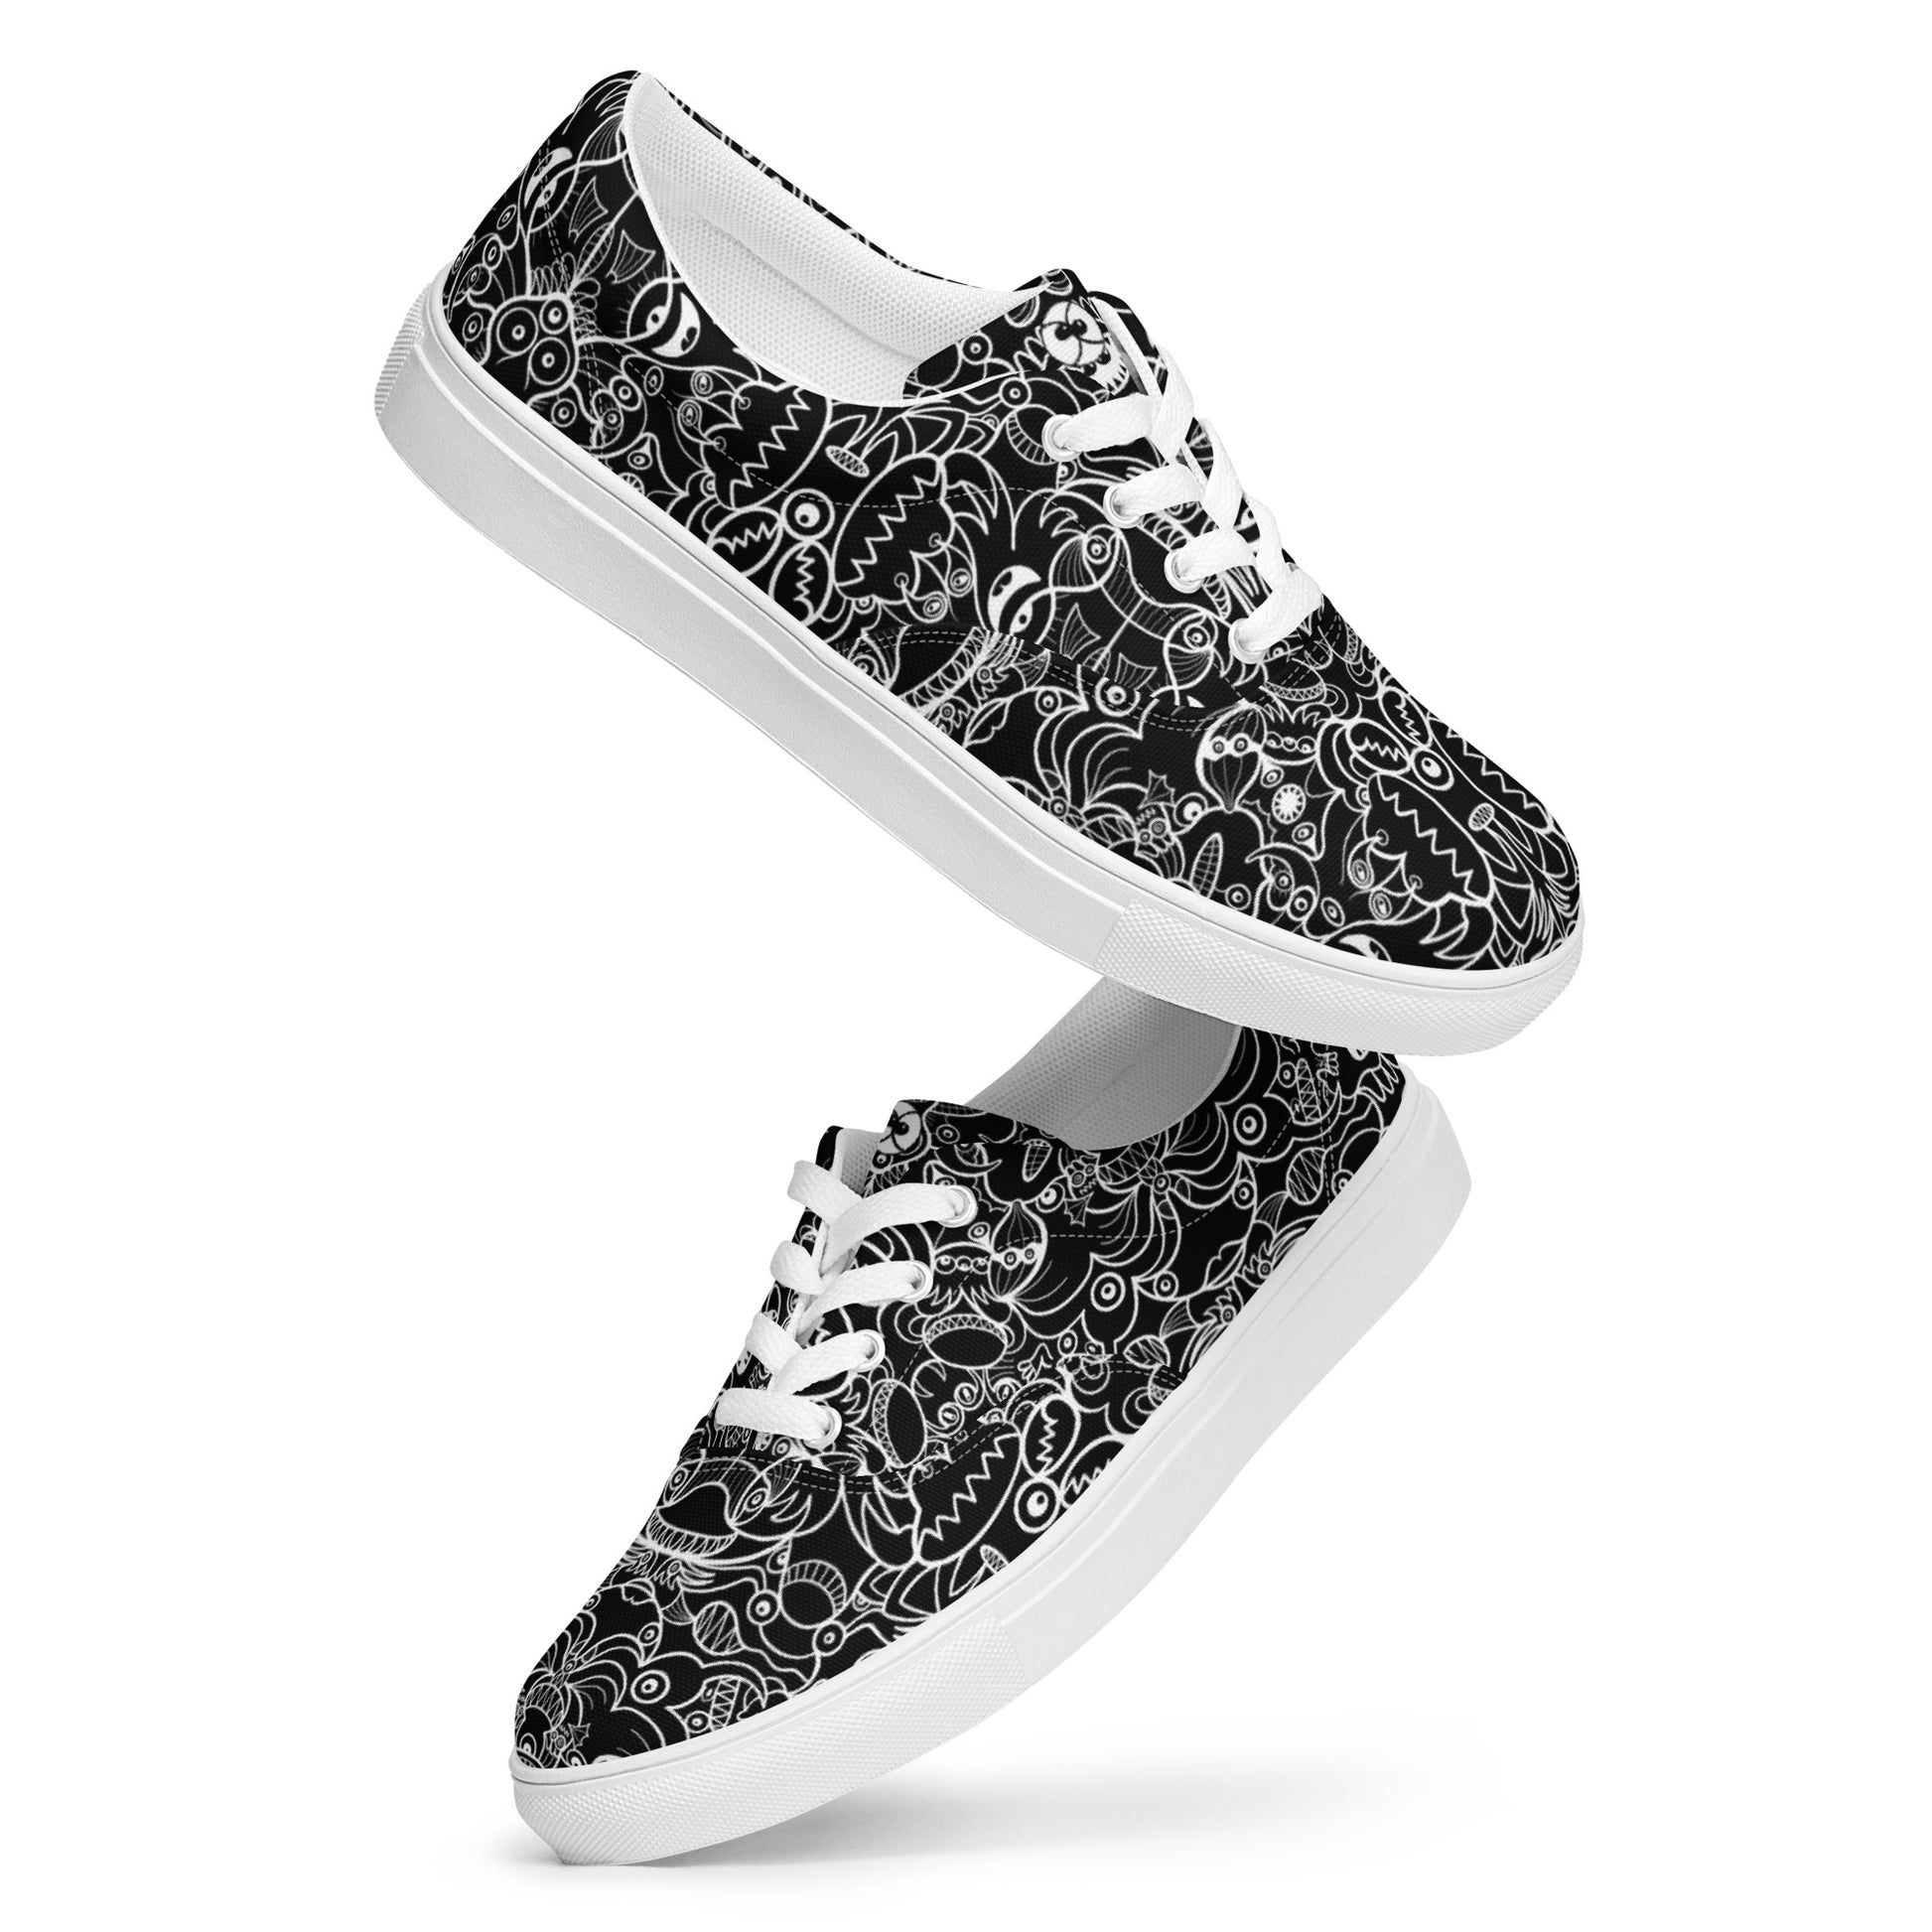 The powerful dark side of the Doodle world Men’s lace-up canvas shoes. Playing with shoes